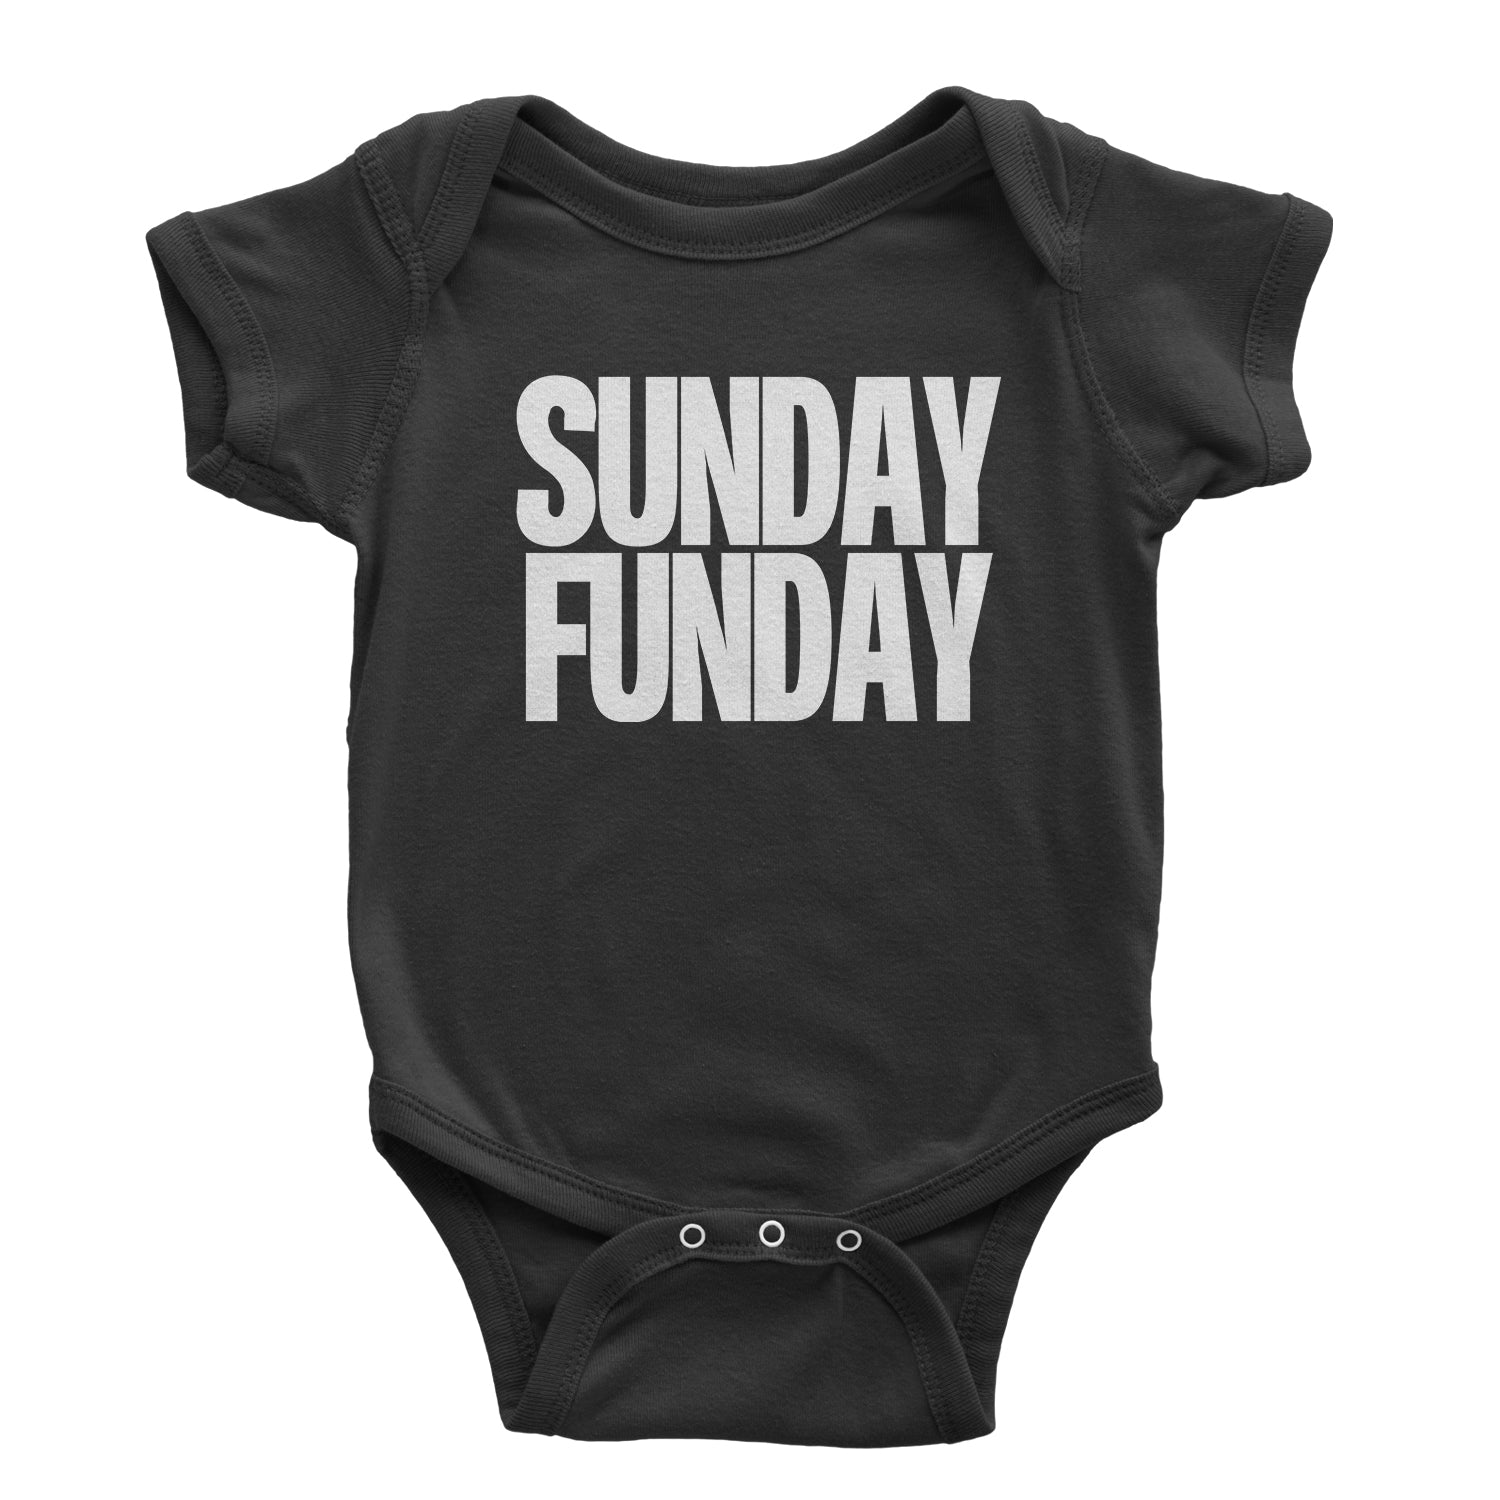 Sunday Funday Infant One-Piece Romper Bodysuit day, drinking, fun, funday, partying, sun, Sunday by Expression Tees